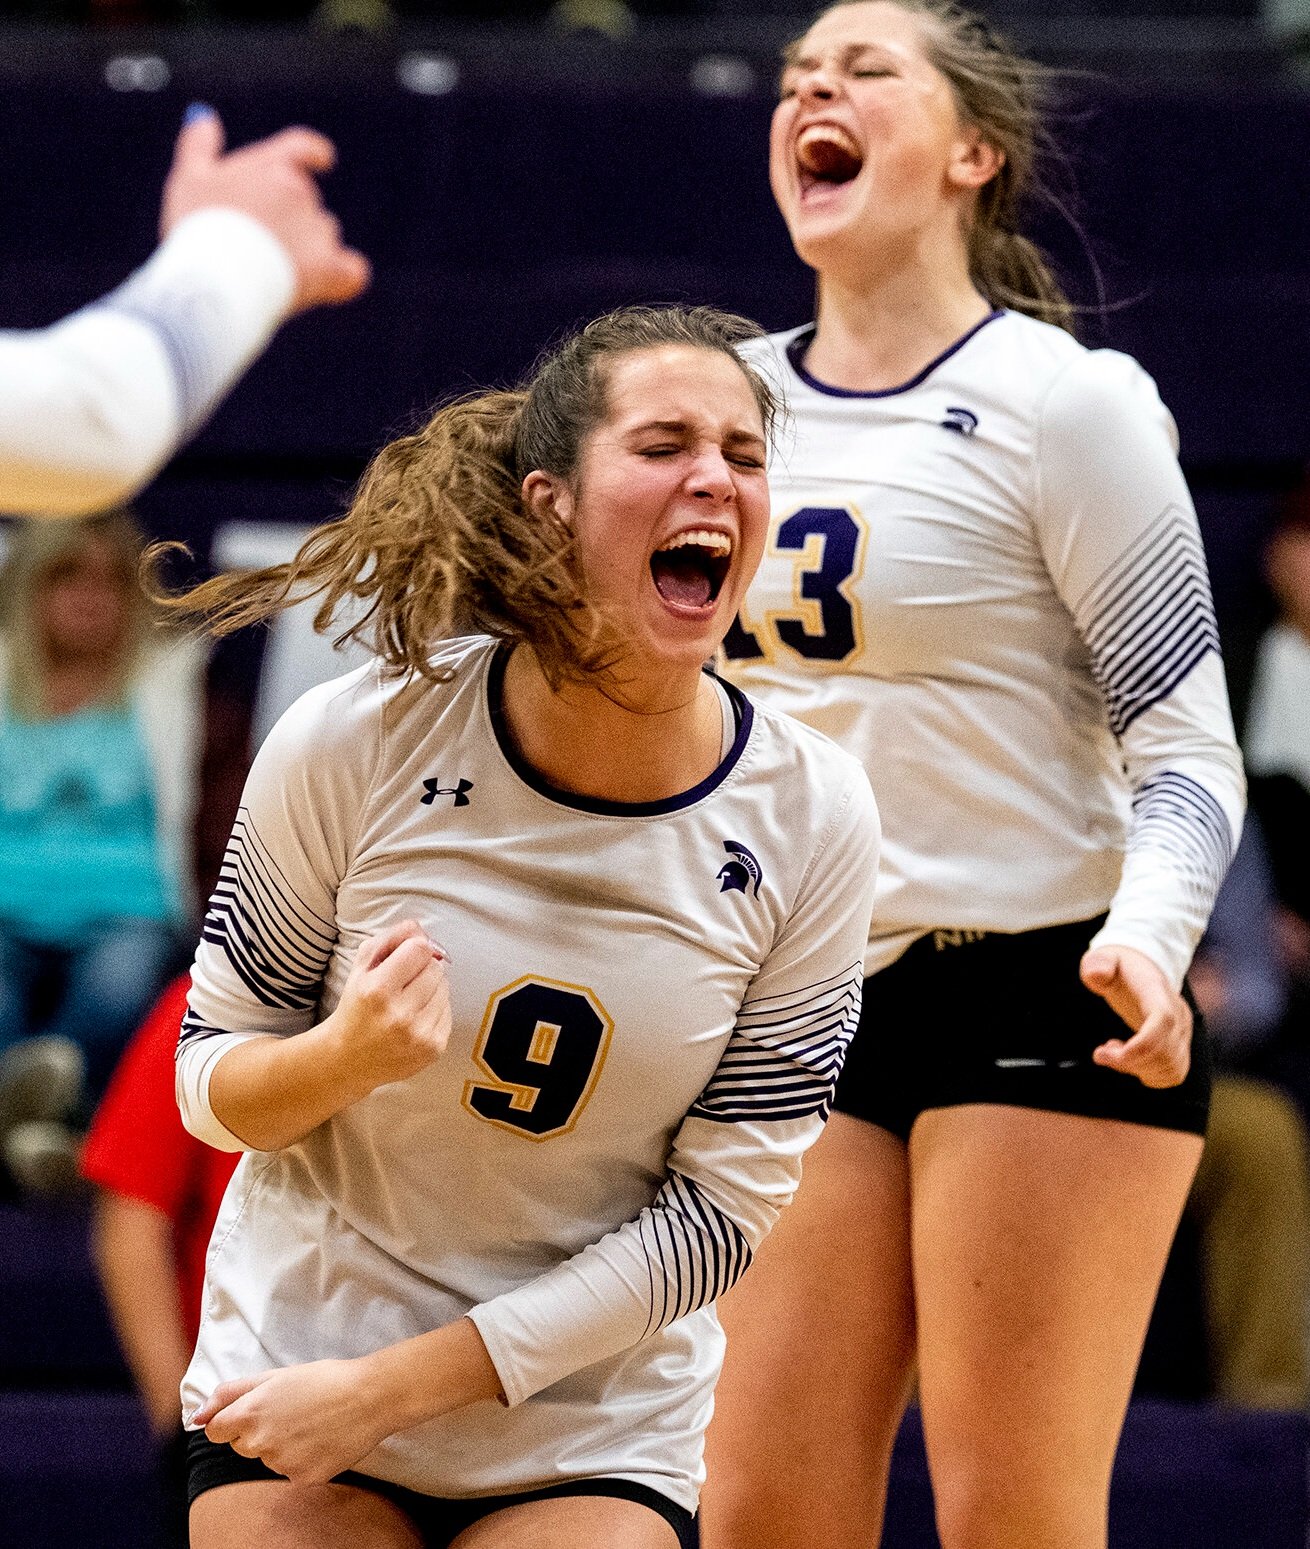  Sentinel's Alexis Umland (9) celebrates after scoring during their volleyball match at Sentinel High School, Oct. 31, 2019 in Missoula, Mont.  